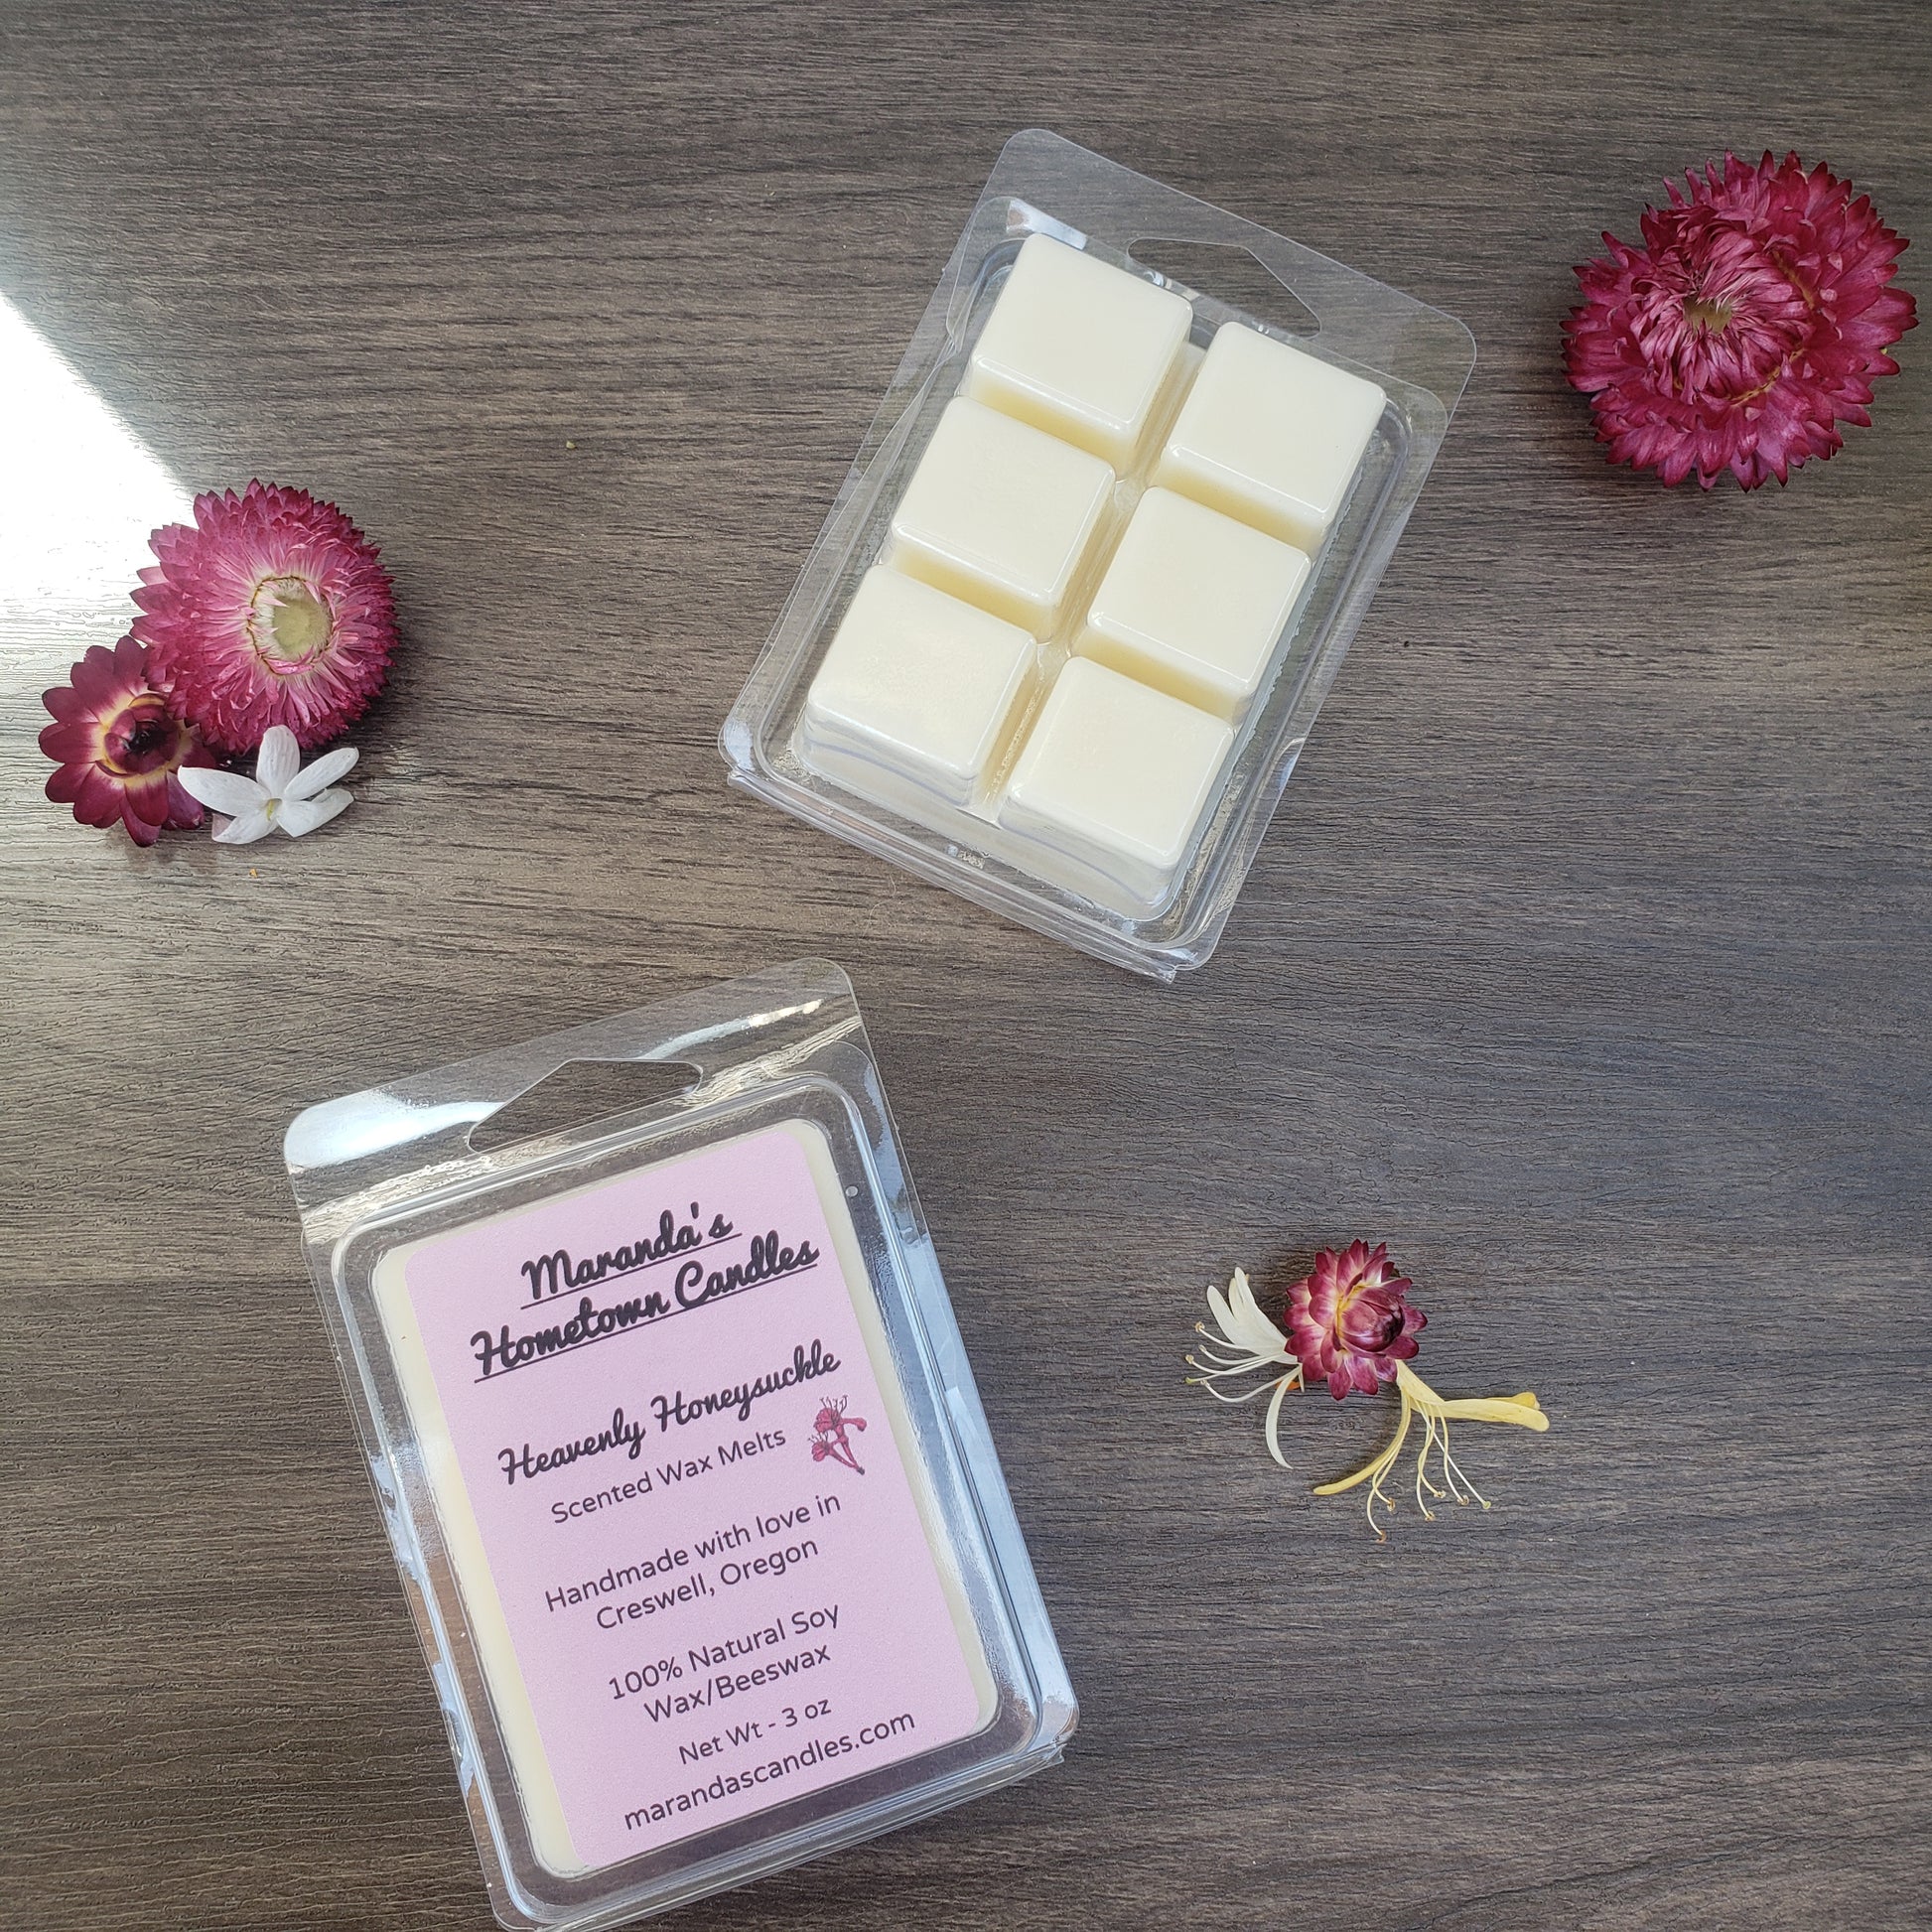 100% Soy Wax Melts Box | caribbean coconut |wax melts | home fragrance |  home decor | soy candles | smell amazing | scented wax 